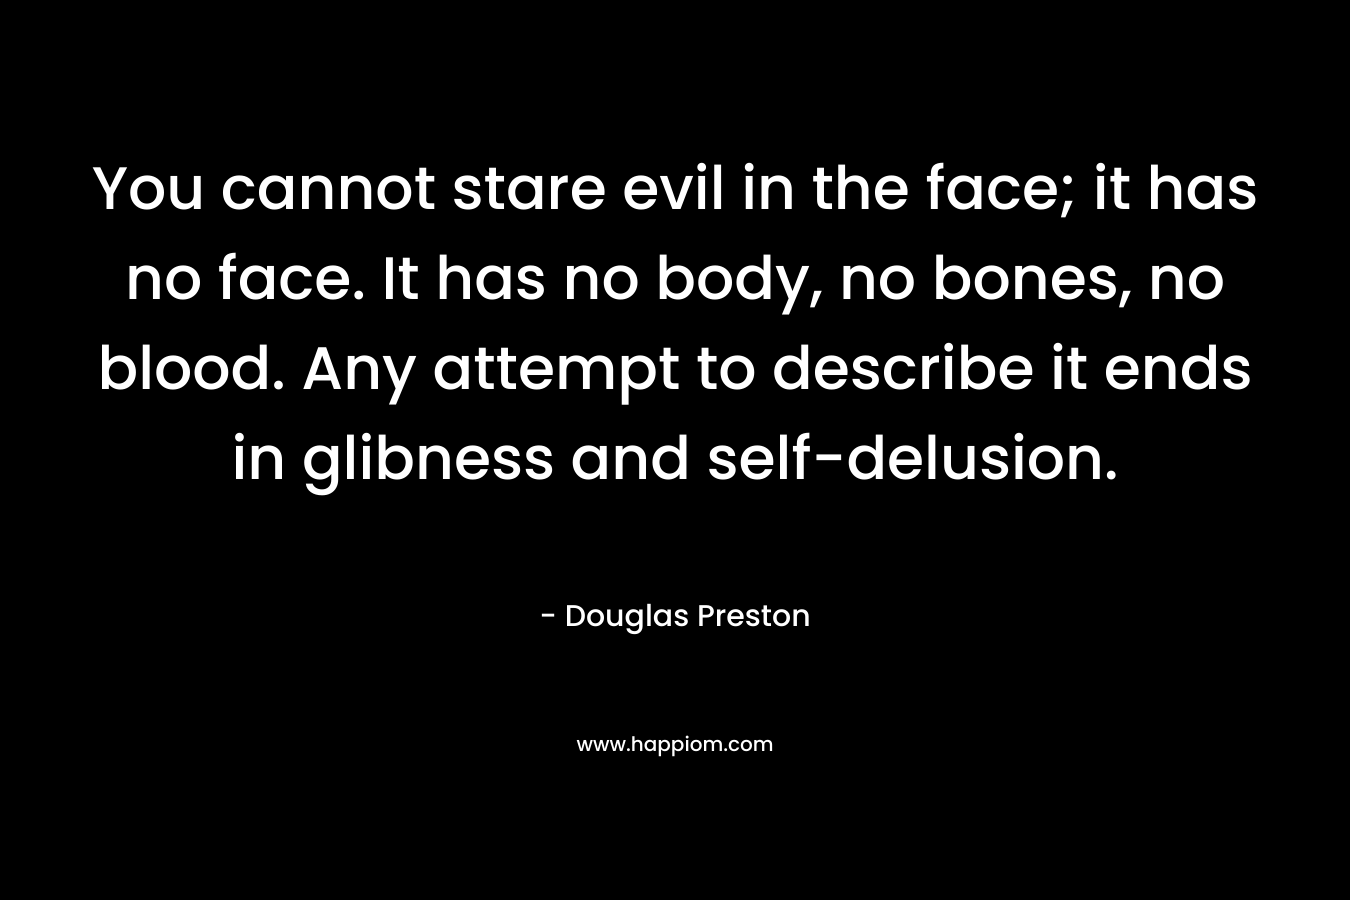 You cannot stare evil in the face; it has no face. It has no body, no bones, no blood. Any attempt to describe it ends in glibness and self-delusion. – Douglas Preston